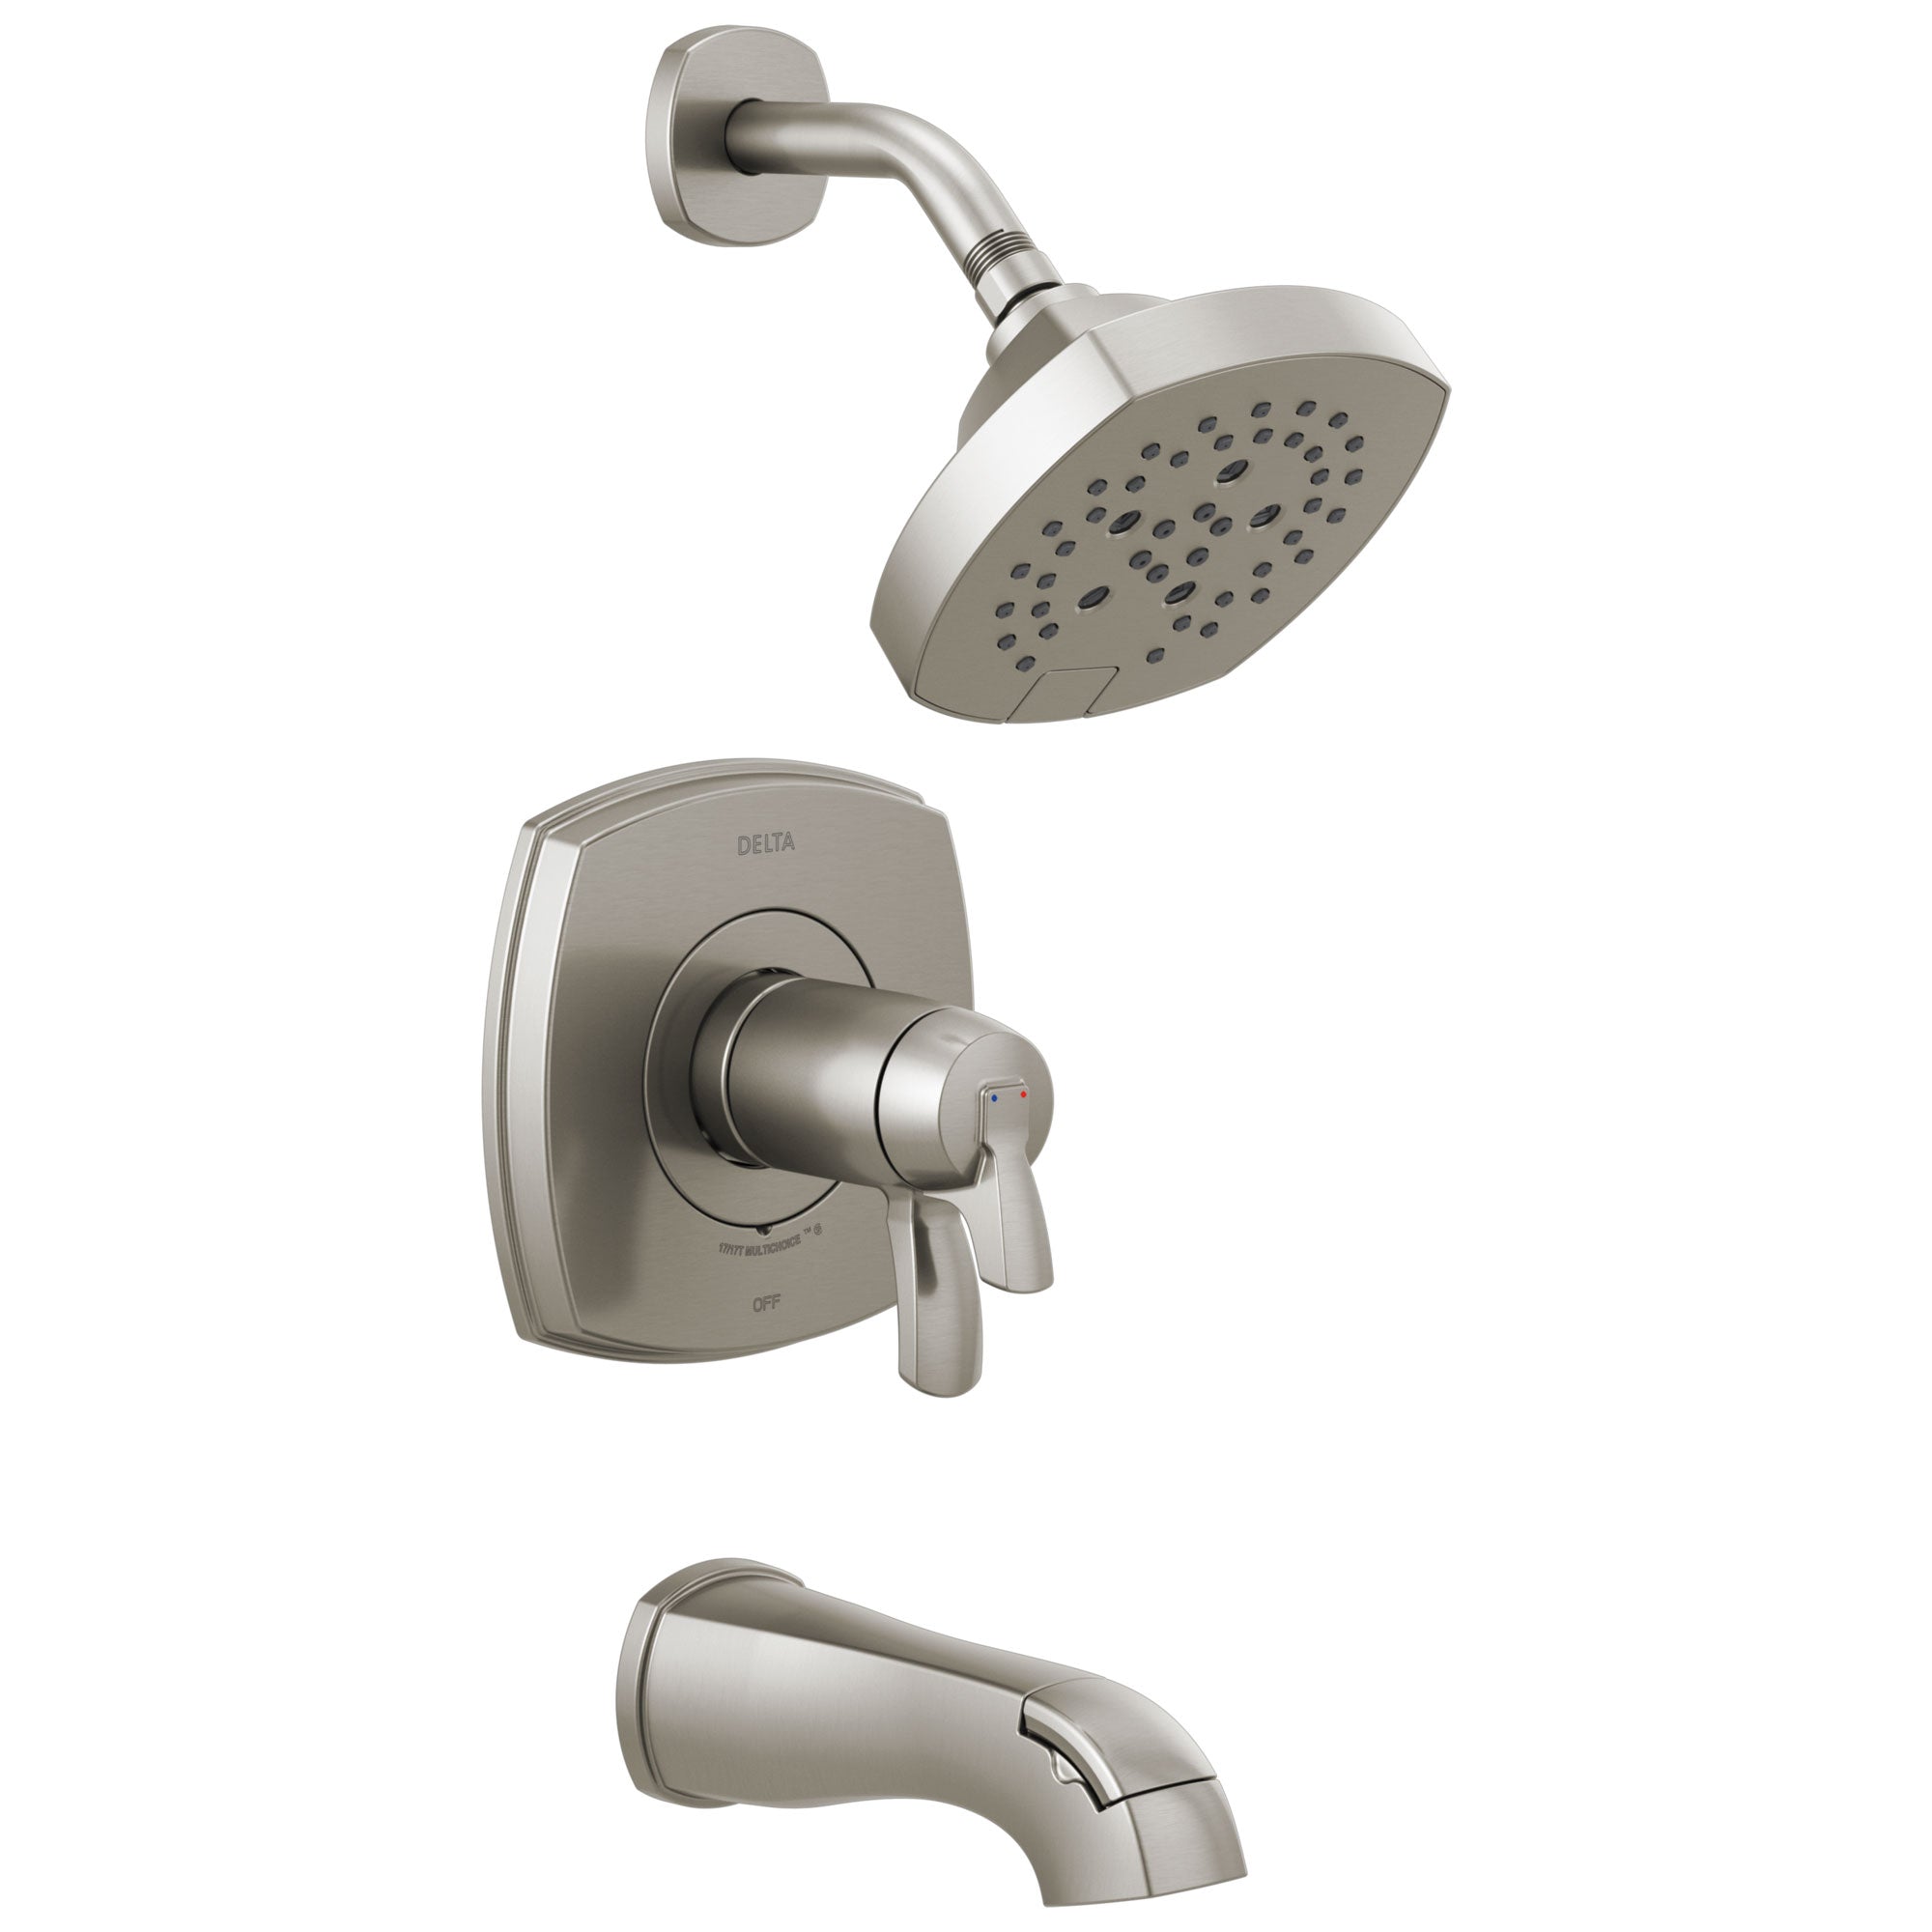 Delta Stryke Stainless Steel Finish 17T Thermostatic Tub and Shower Faucet Combination Includes Handles, Cartridge, and Valve with Stops D3228V